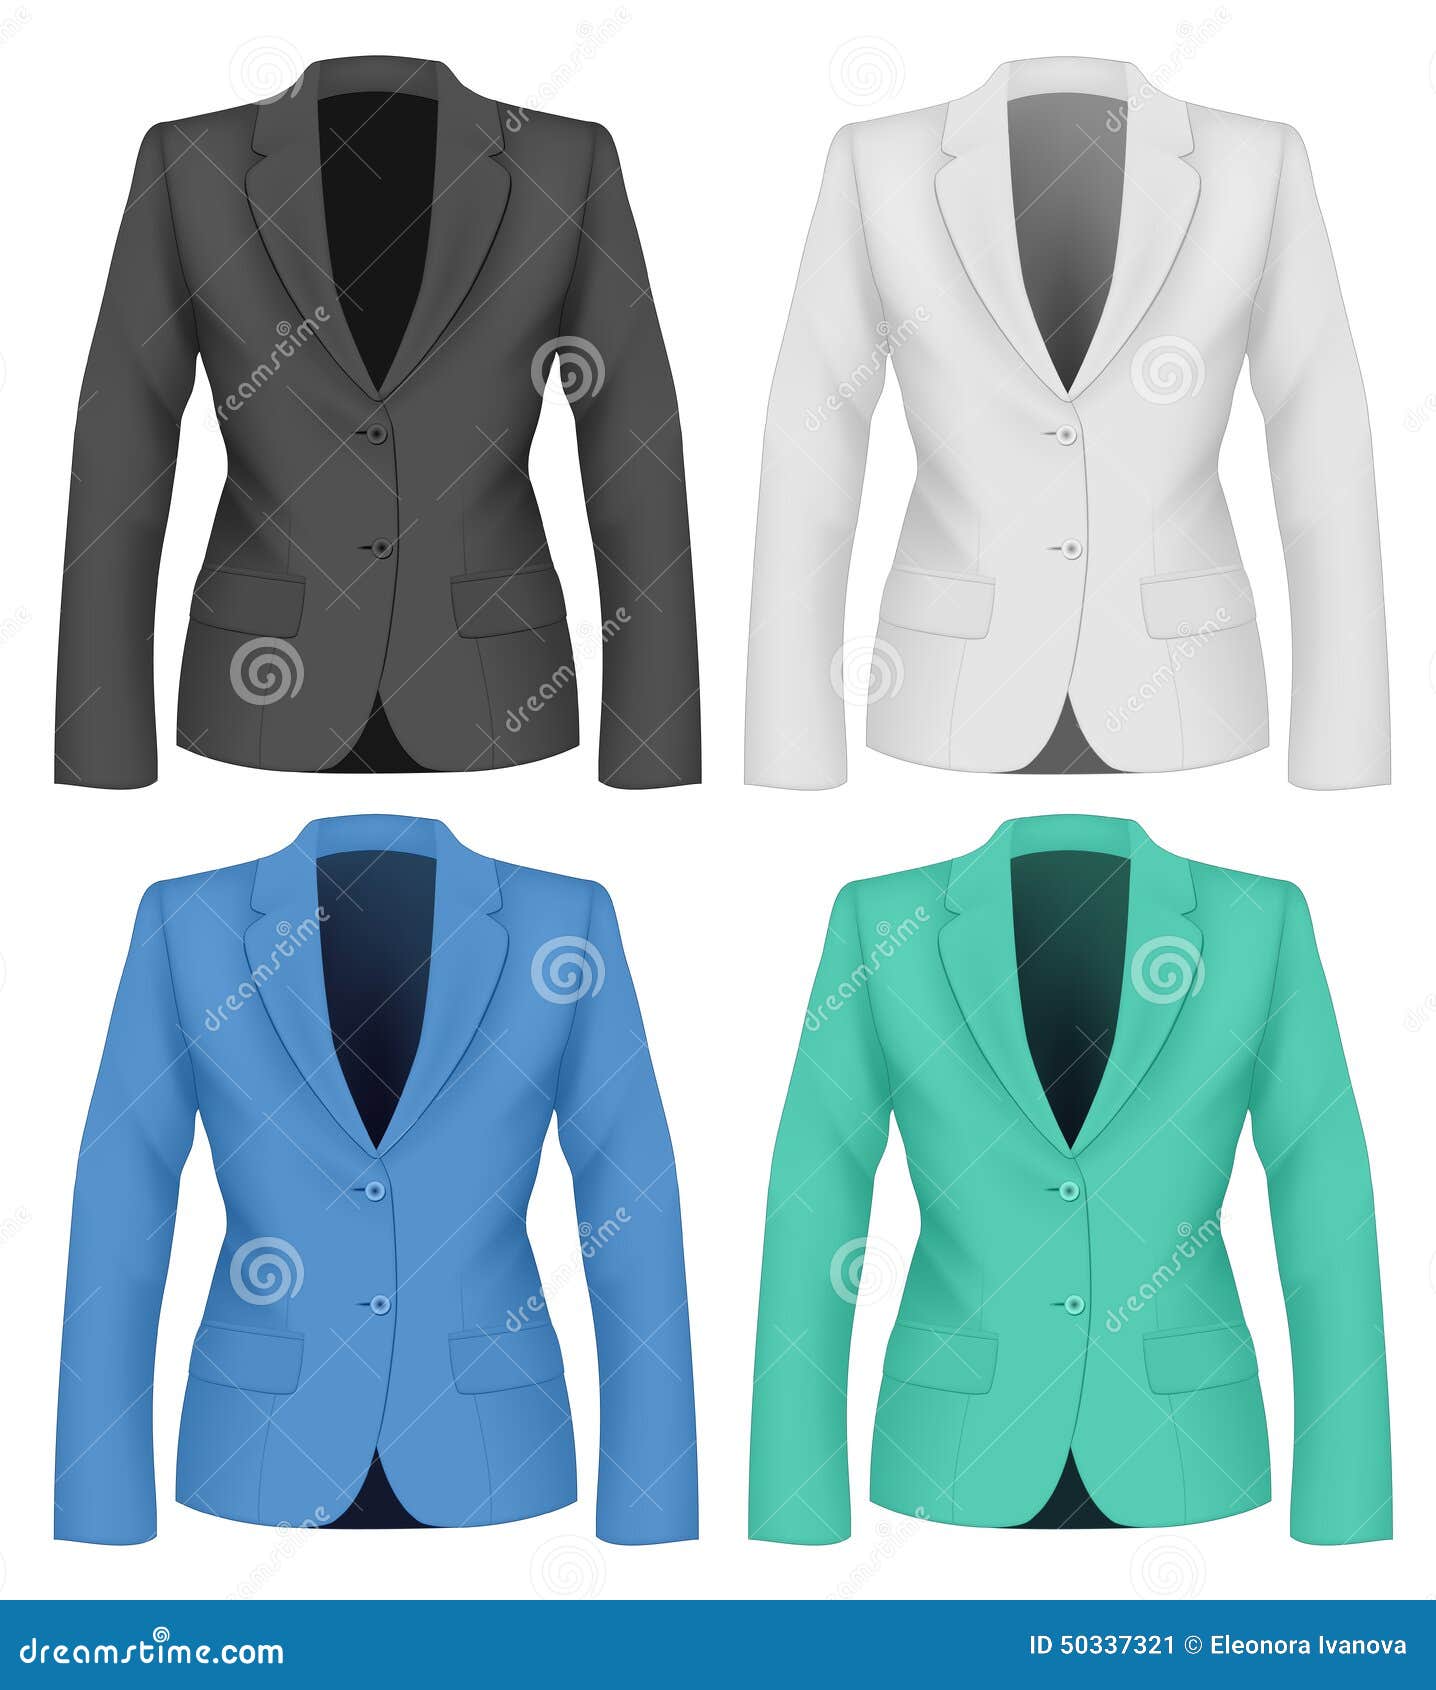 New Design Women Formal Suit (Black) in Kollam at best price by Blazer Zone  - Justdial